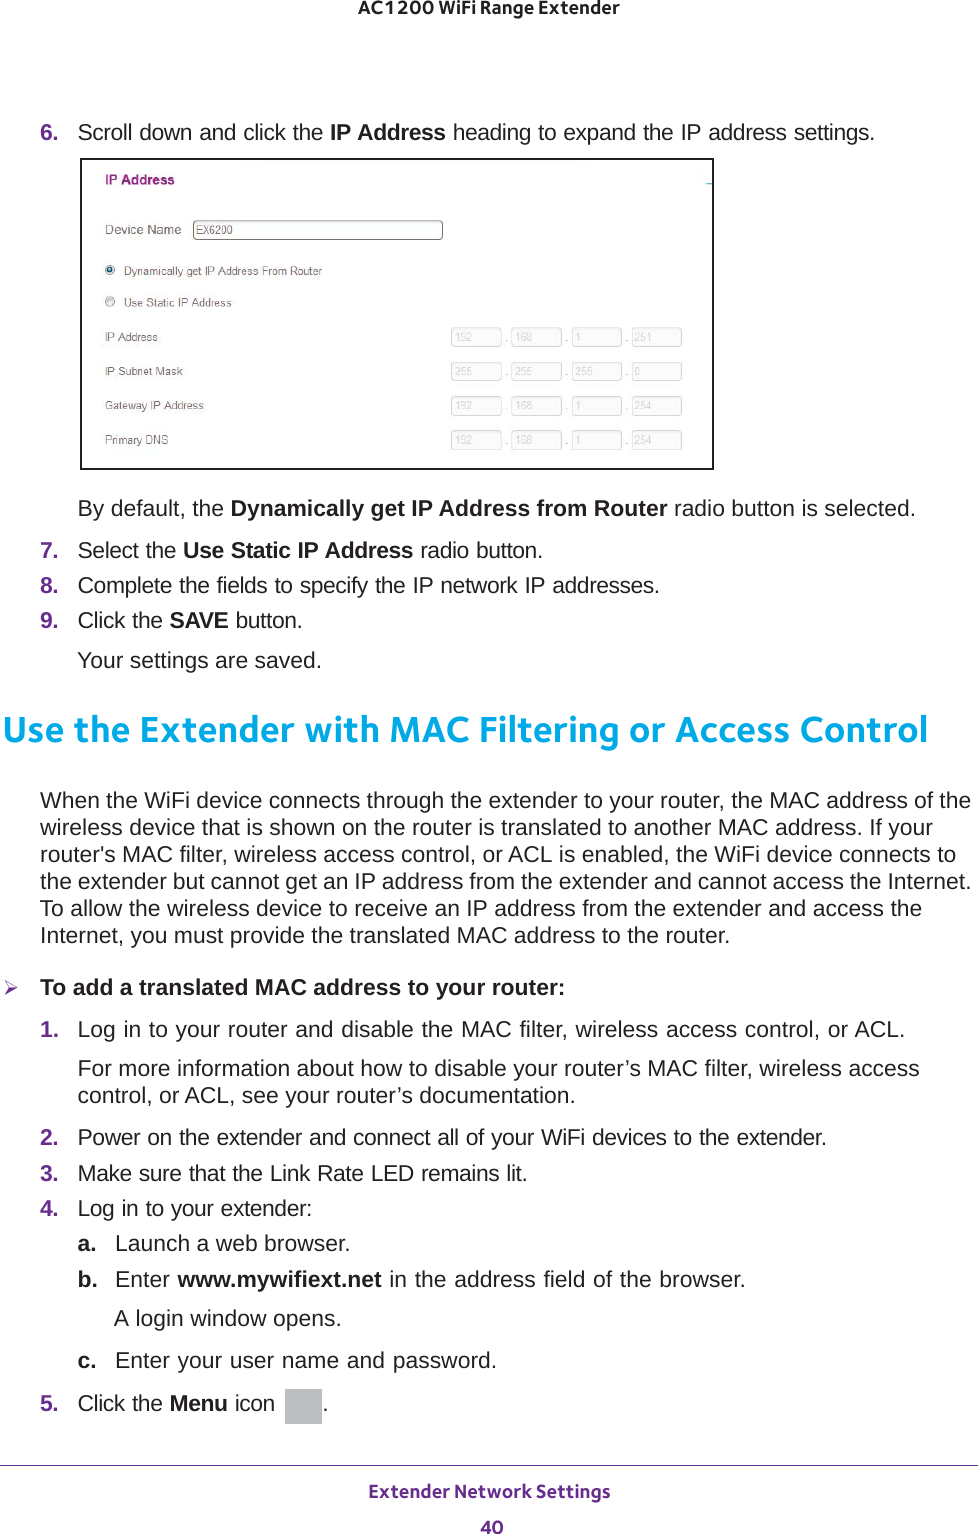 Extender Network Settings 40AC1200 WiFi Range Extender 6.  Scroll down and click the IP Address heading to expand the IP address settings.By default, the Dynamically get IP Address from Router radio button is selected.7.  Select the Use Static IP Address radio button.8.  Complete the fields to specify the IP network IP addresses.9.  Click the SAVE button.Your settings are saved.Use the Extender with MAC Filtering or Access ControlWhen the WiFi device connects through the extender to your router, the MAC address of the wireless device that is shown on the router is translated to another MAC address. If your router&apos;s MAC filter, wireless access control, or ACL is enabled, the WiFi device connects to the extender but cannot get an IP address from the extender and cannot access the Internet. To allow the wireless device to receive an IP address from the extender and access the Internet, you must provide the translated MAC address to the router.To add a translated MAC address to your router:1.  Log in to your router and disable the MAC filter, wireless access control, or ACL.For more information about how to disable your router’s MAC filter, wireless access control, or ACL, see your router’s documentation.2.  Power on the extender and connect all of your WiFi devices to the extender.3.  Make sure that the Link Rate LED remains lit.4.  Log in to your extender:a. Launch a web browser.b.  Enter www.mywifiext.net in the address field of the browser.A login window opens.c.  Enter your user name and password.5.  Click the Menu icon  .